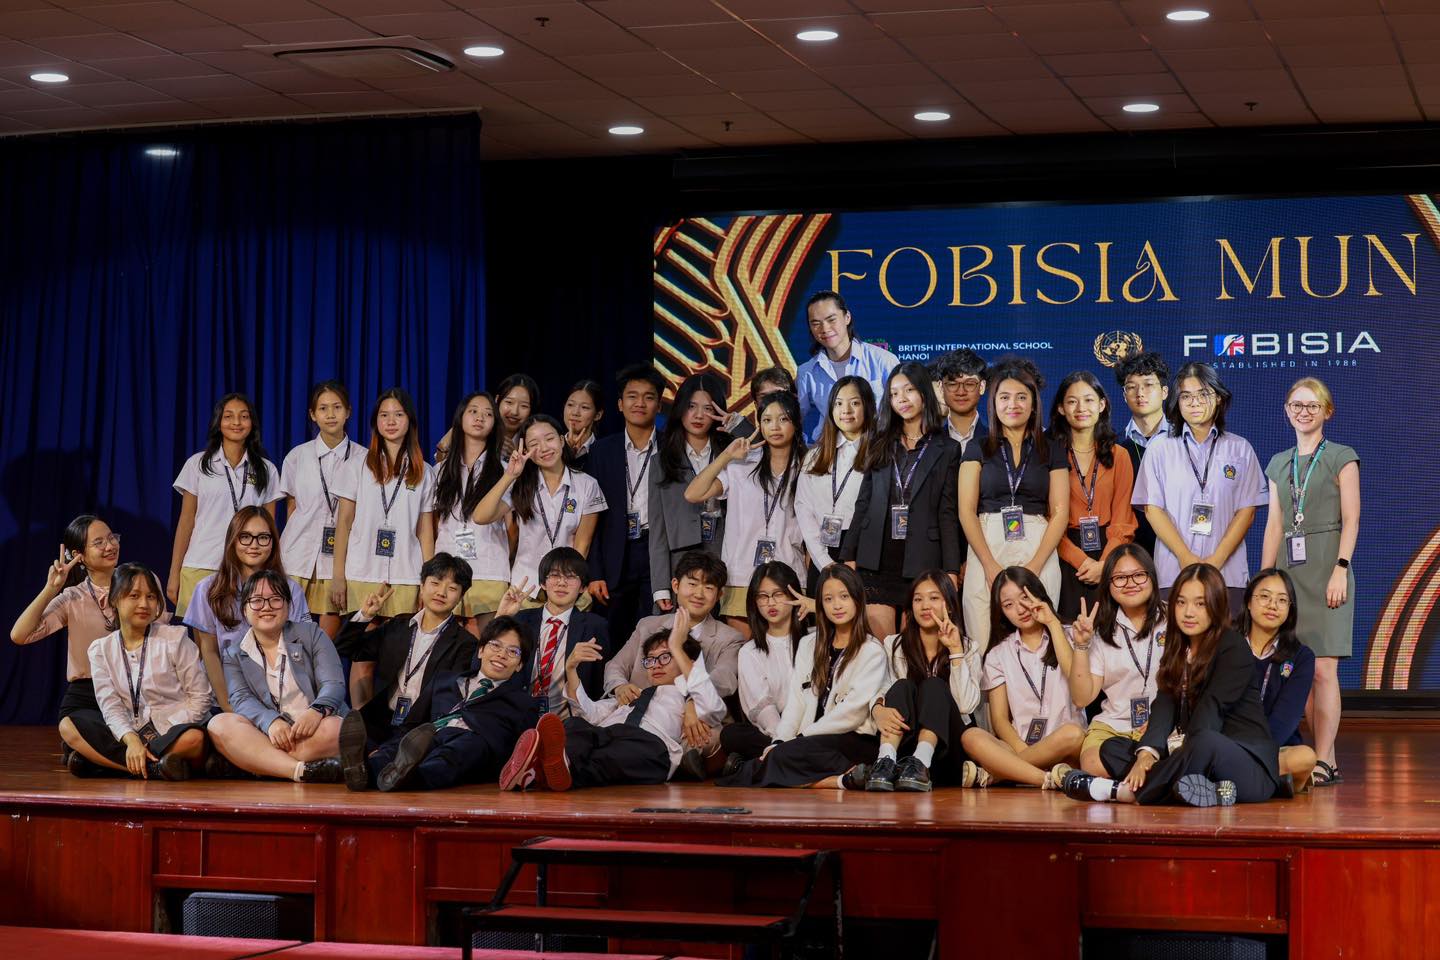 The Leaders of Tomorrow: BIS Hanoi Hosts the FOBISIA Model United Nations (MUN)-The Leaders of Tomorrow BIS Hanoi Hosts the FOBISIA Model United Nations-400680188_1368638510675807_6836153185867800898_n